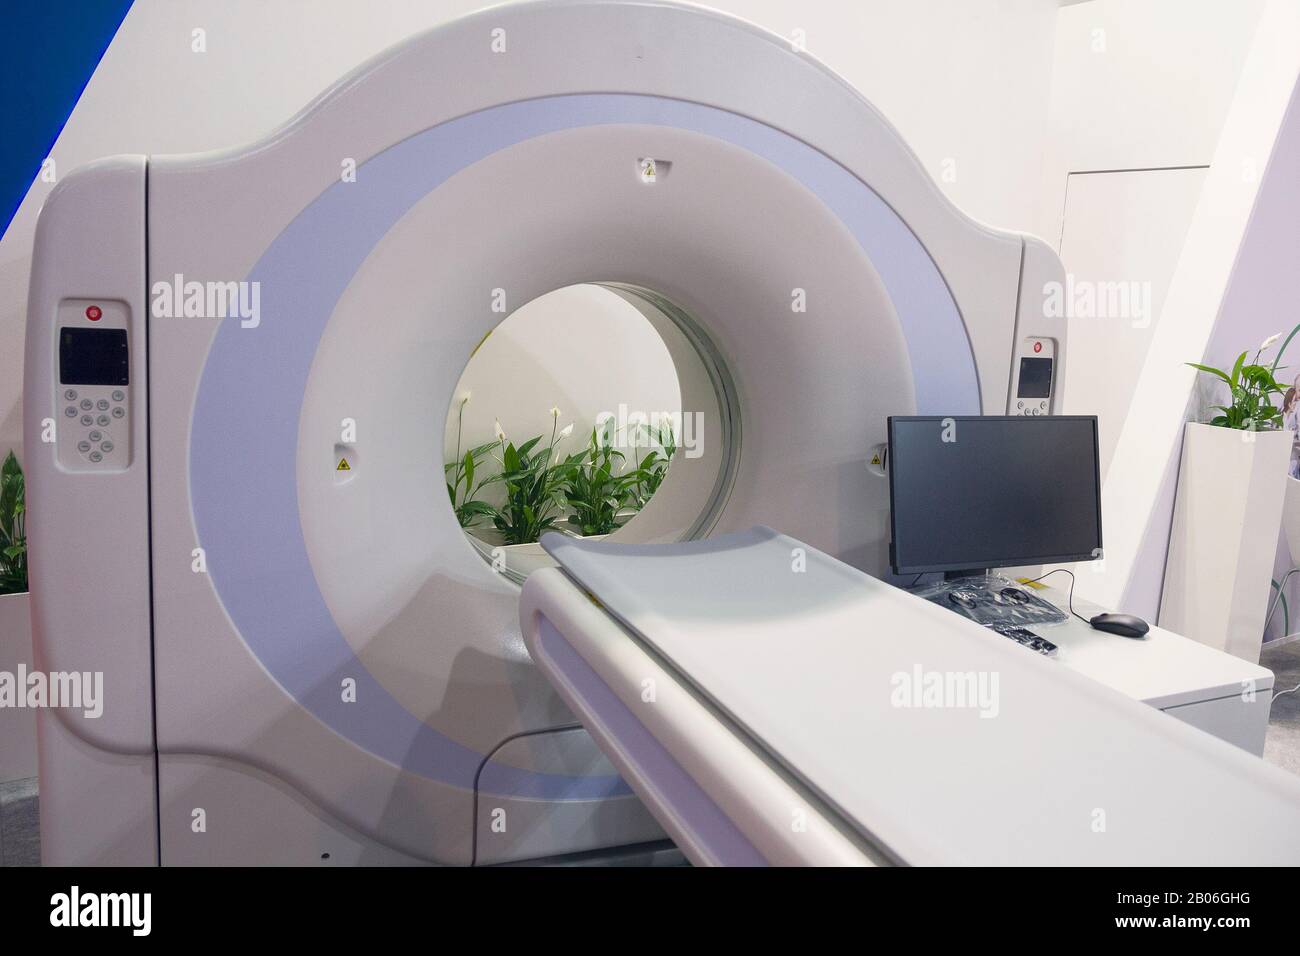 CT (computed tomography) scanner in an oncology hospital. Medical equipment Stock Photo